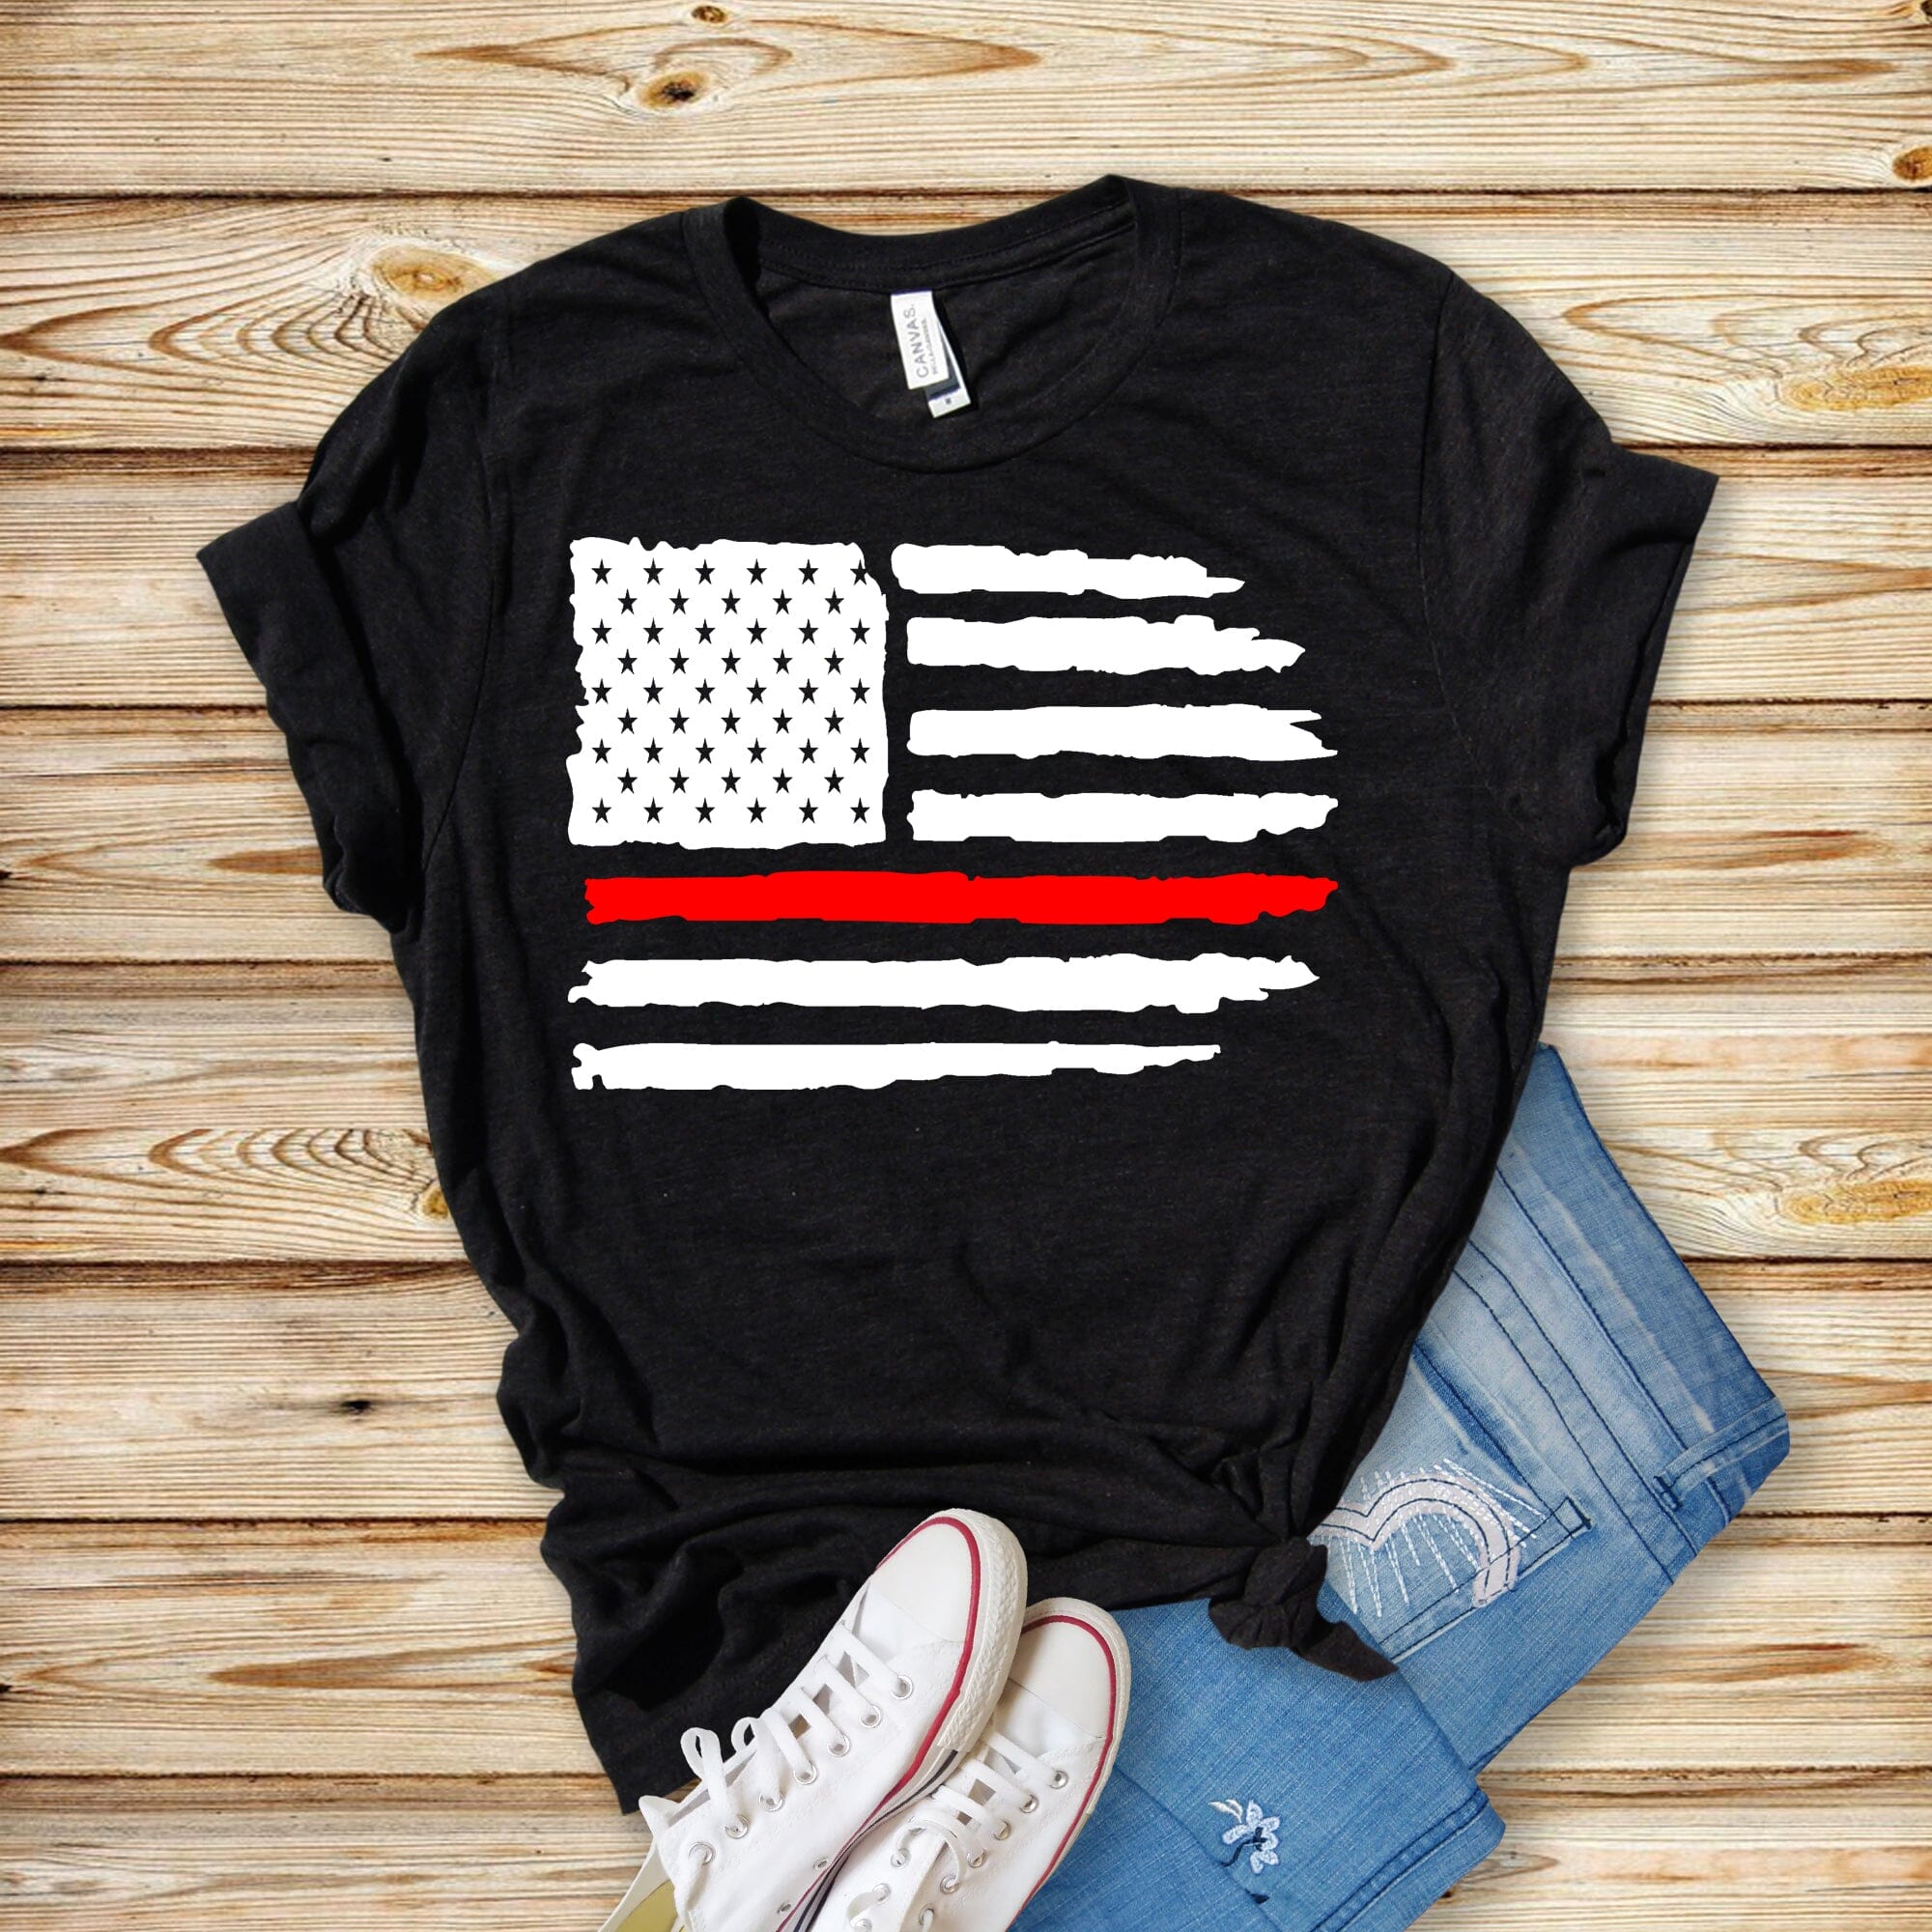 Thin red line flag T-shirt Gravesfamilycreations